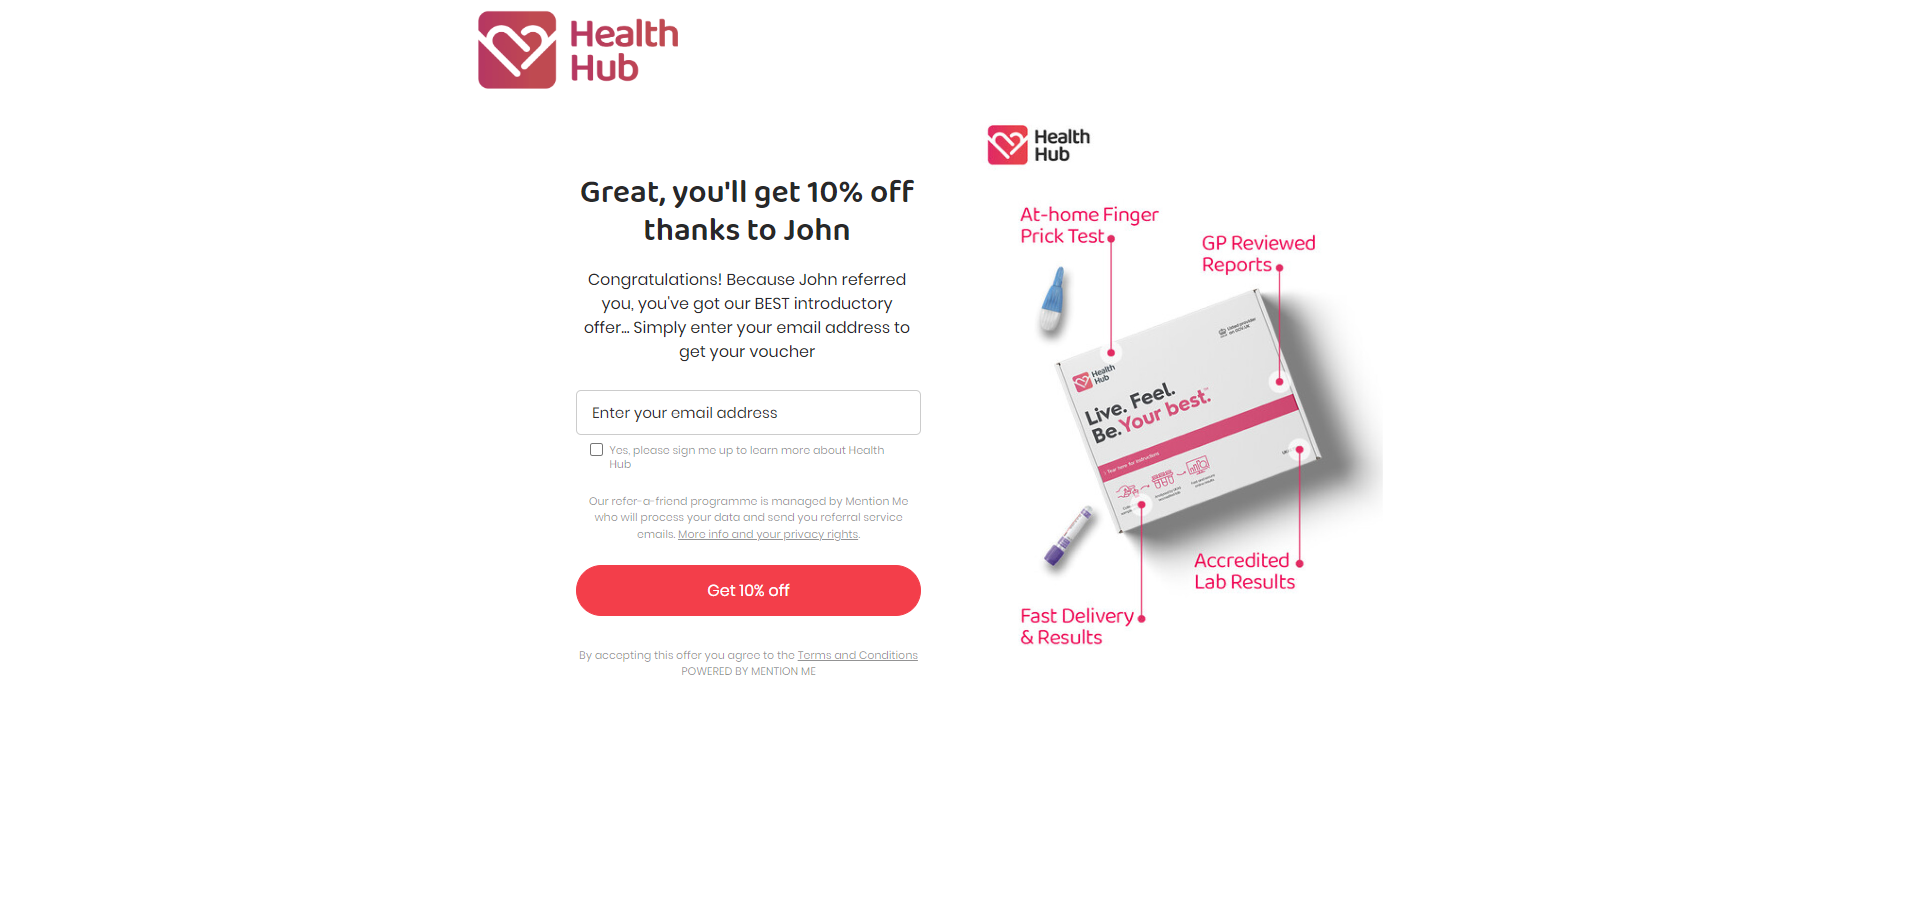 Referral Landing Page for The Health Hub